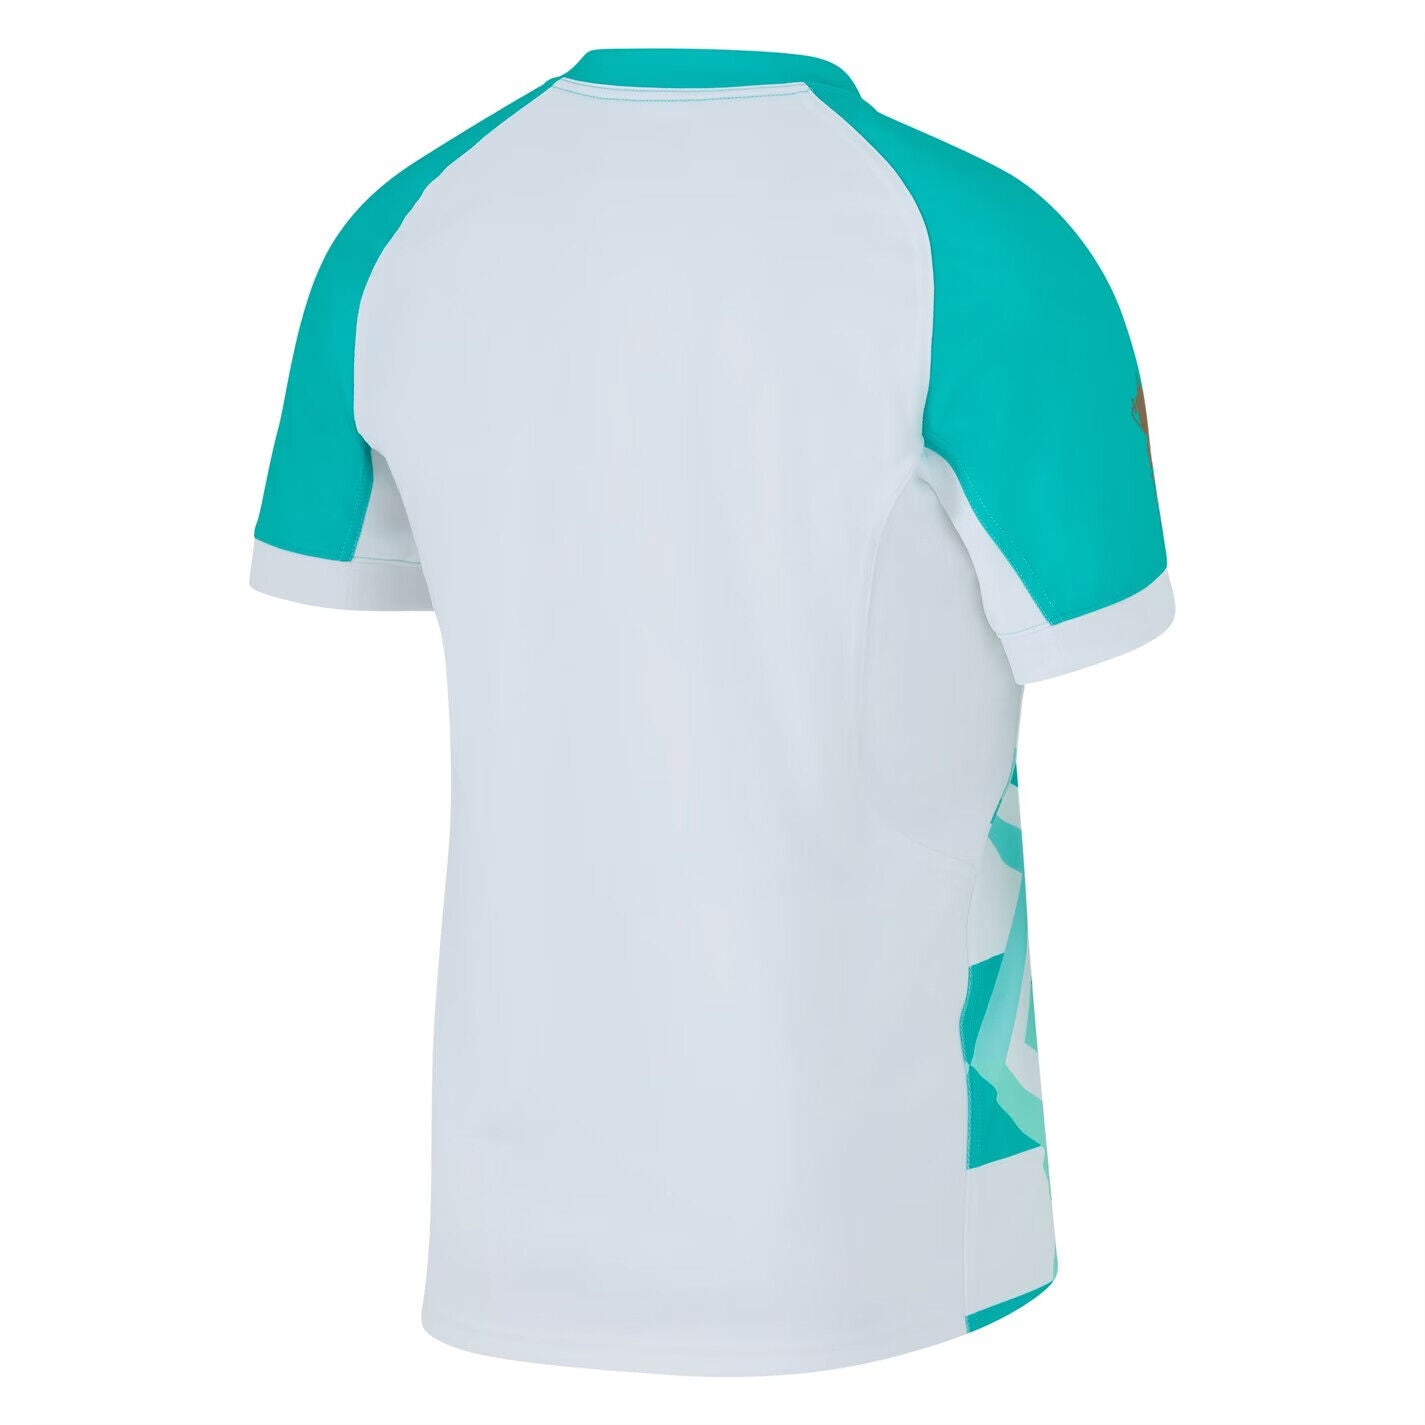 2023 WORLD CUP SOUTH AFRICA AWAY RUGBY JERSEY